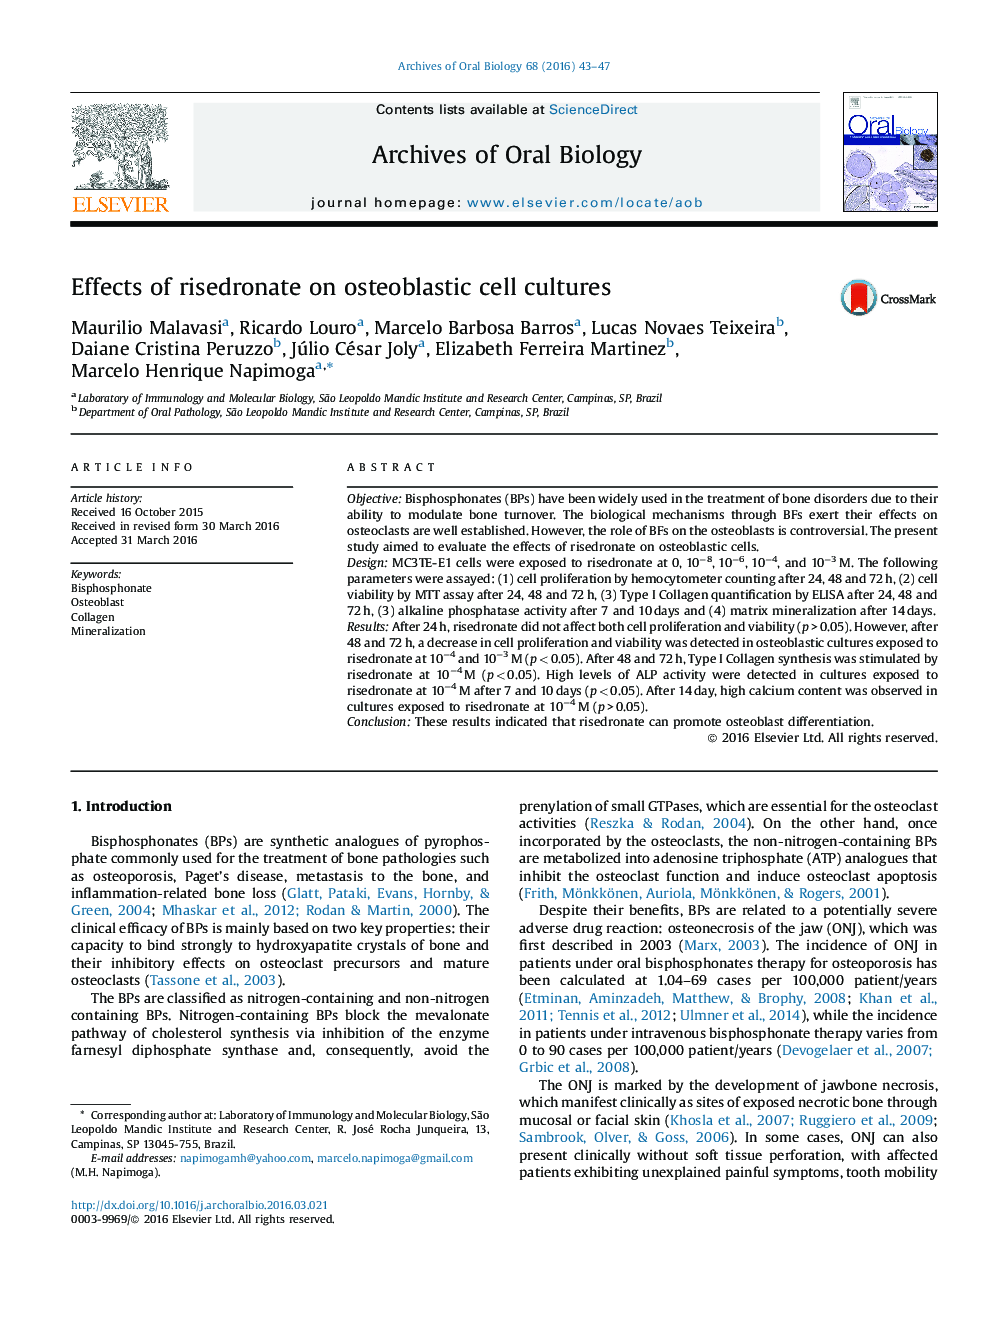 Effects of risedronate on osteoblastic cell cultures